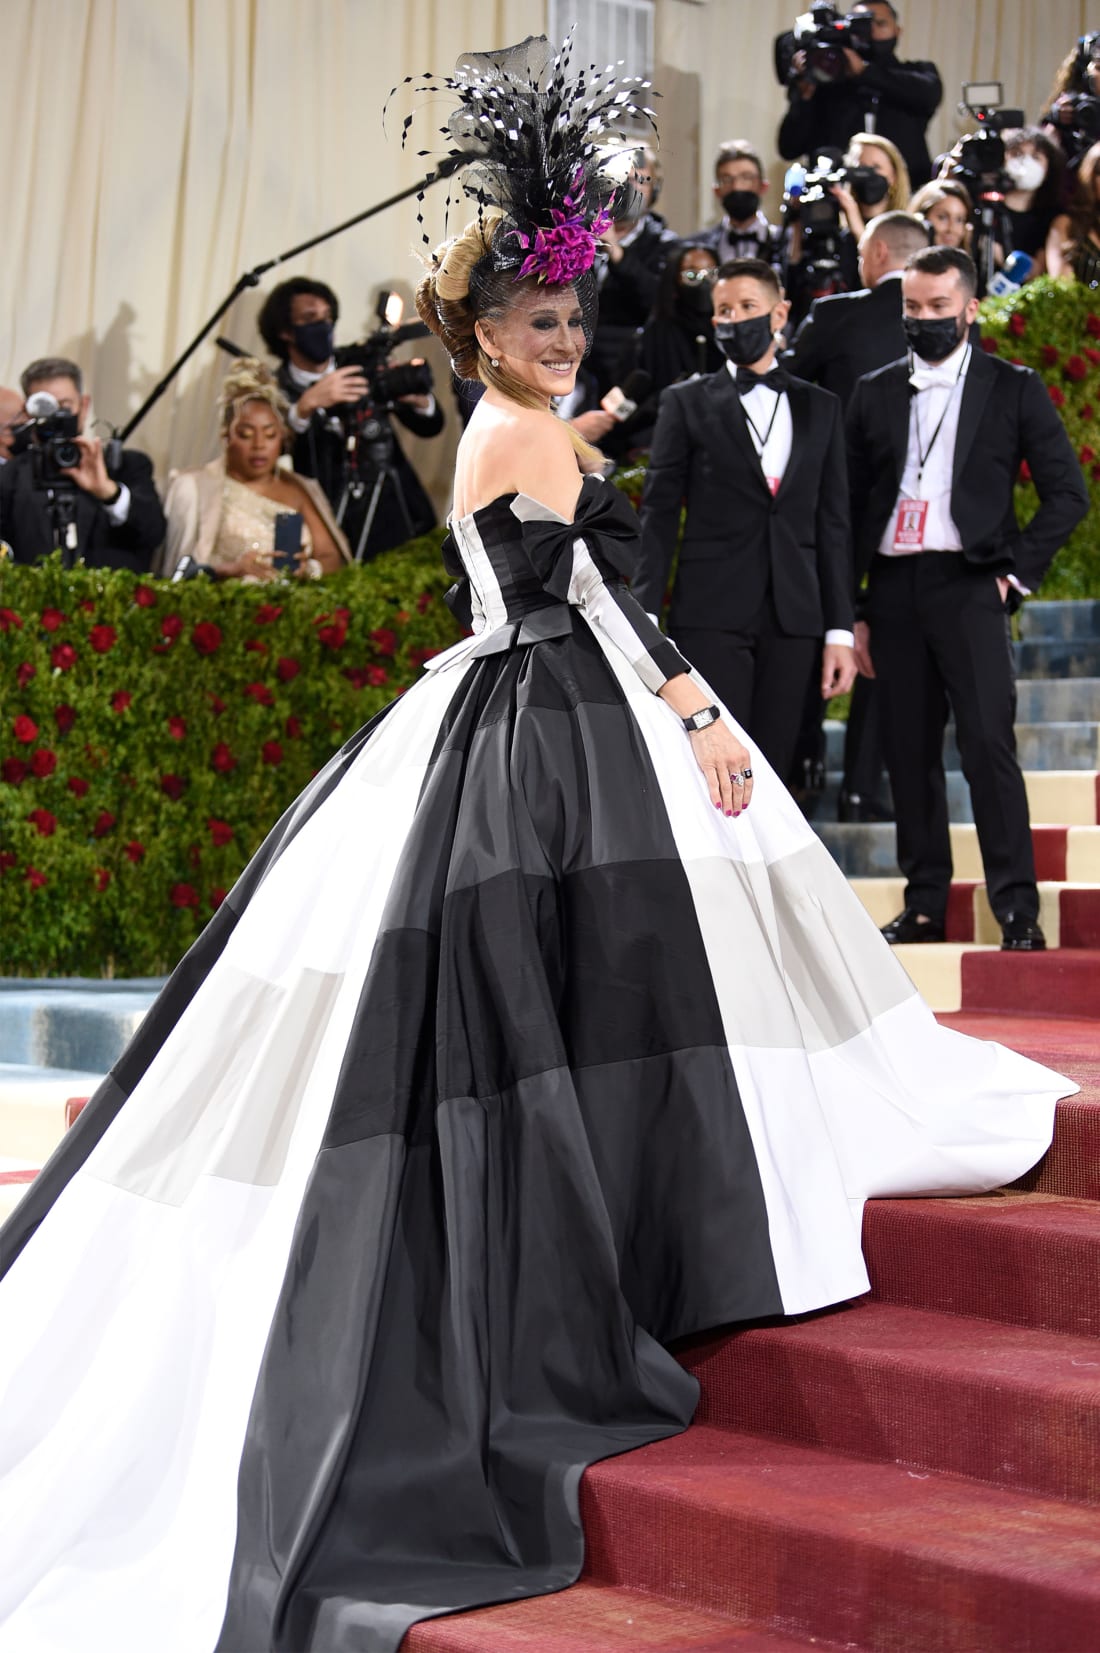 Sarah Jessica Parker in a black-and-white Christopher John Rogers dress with a structure 19th-century-style skirt and a feathered headpiece by milliner Philip Treacy.